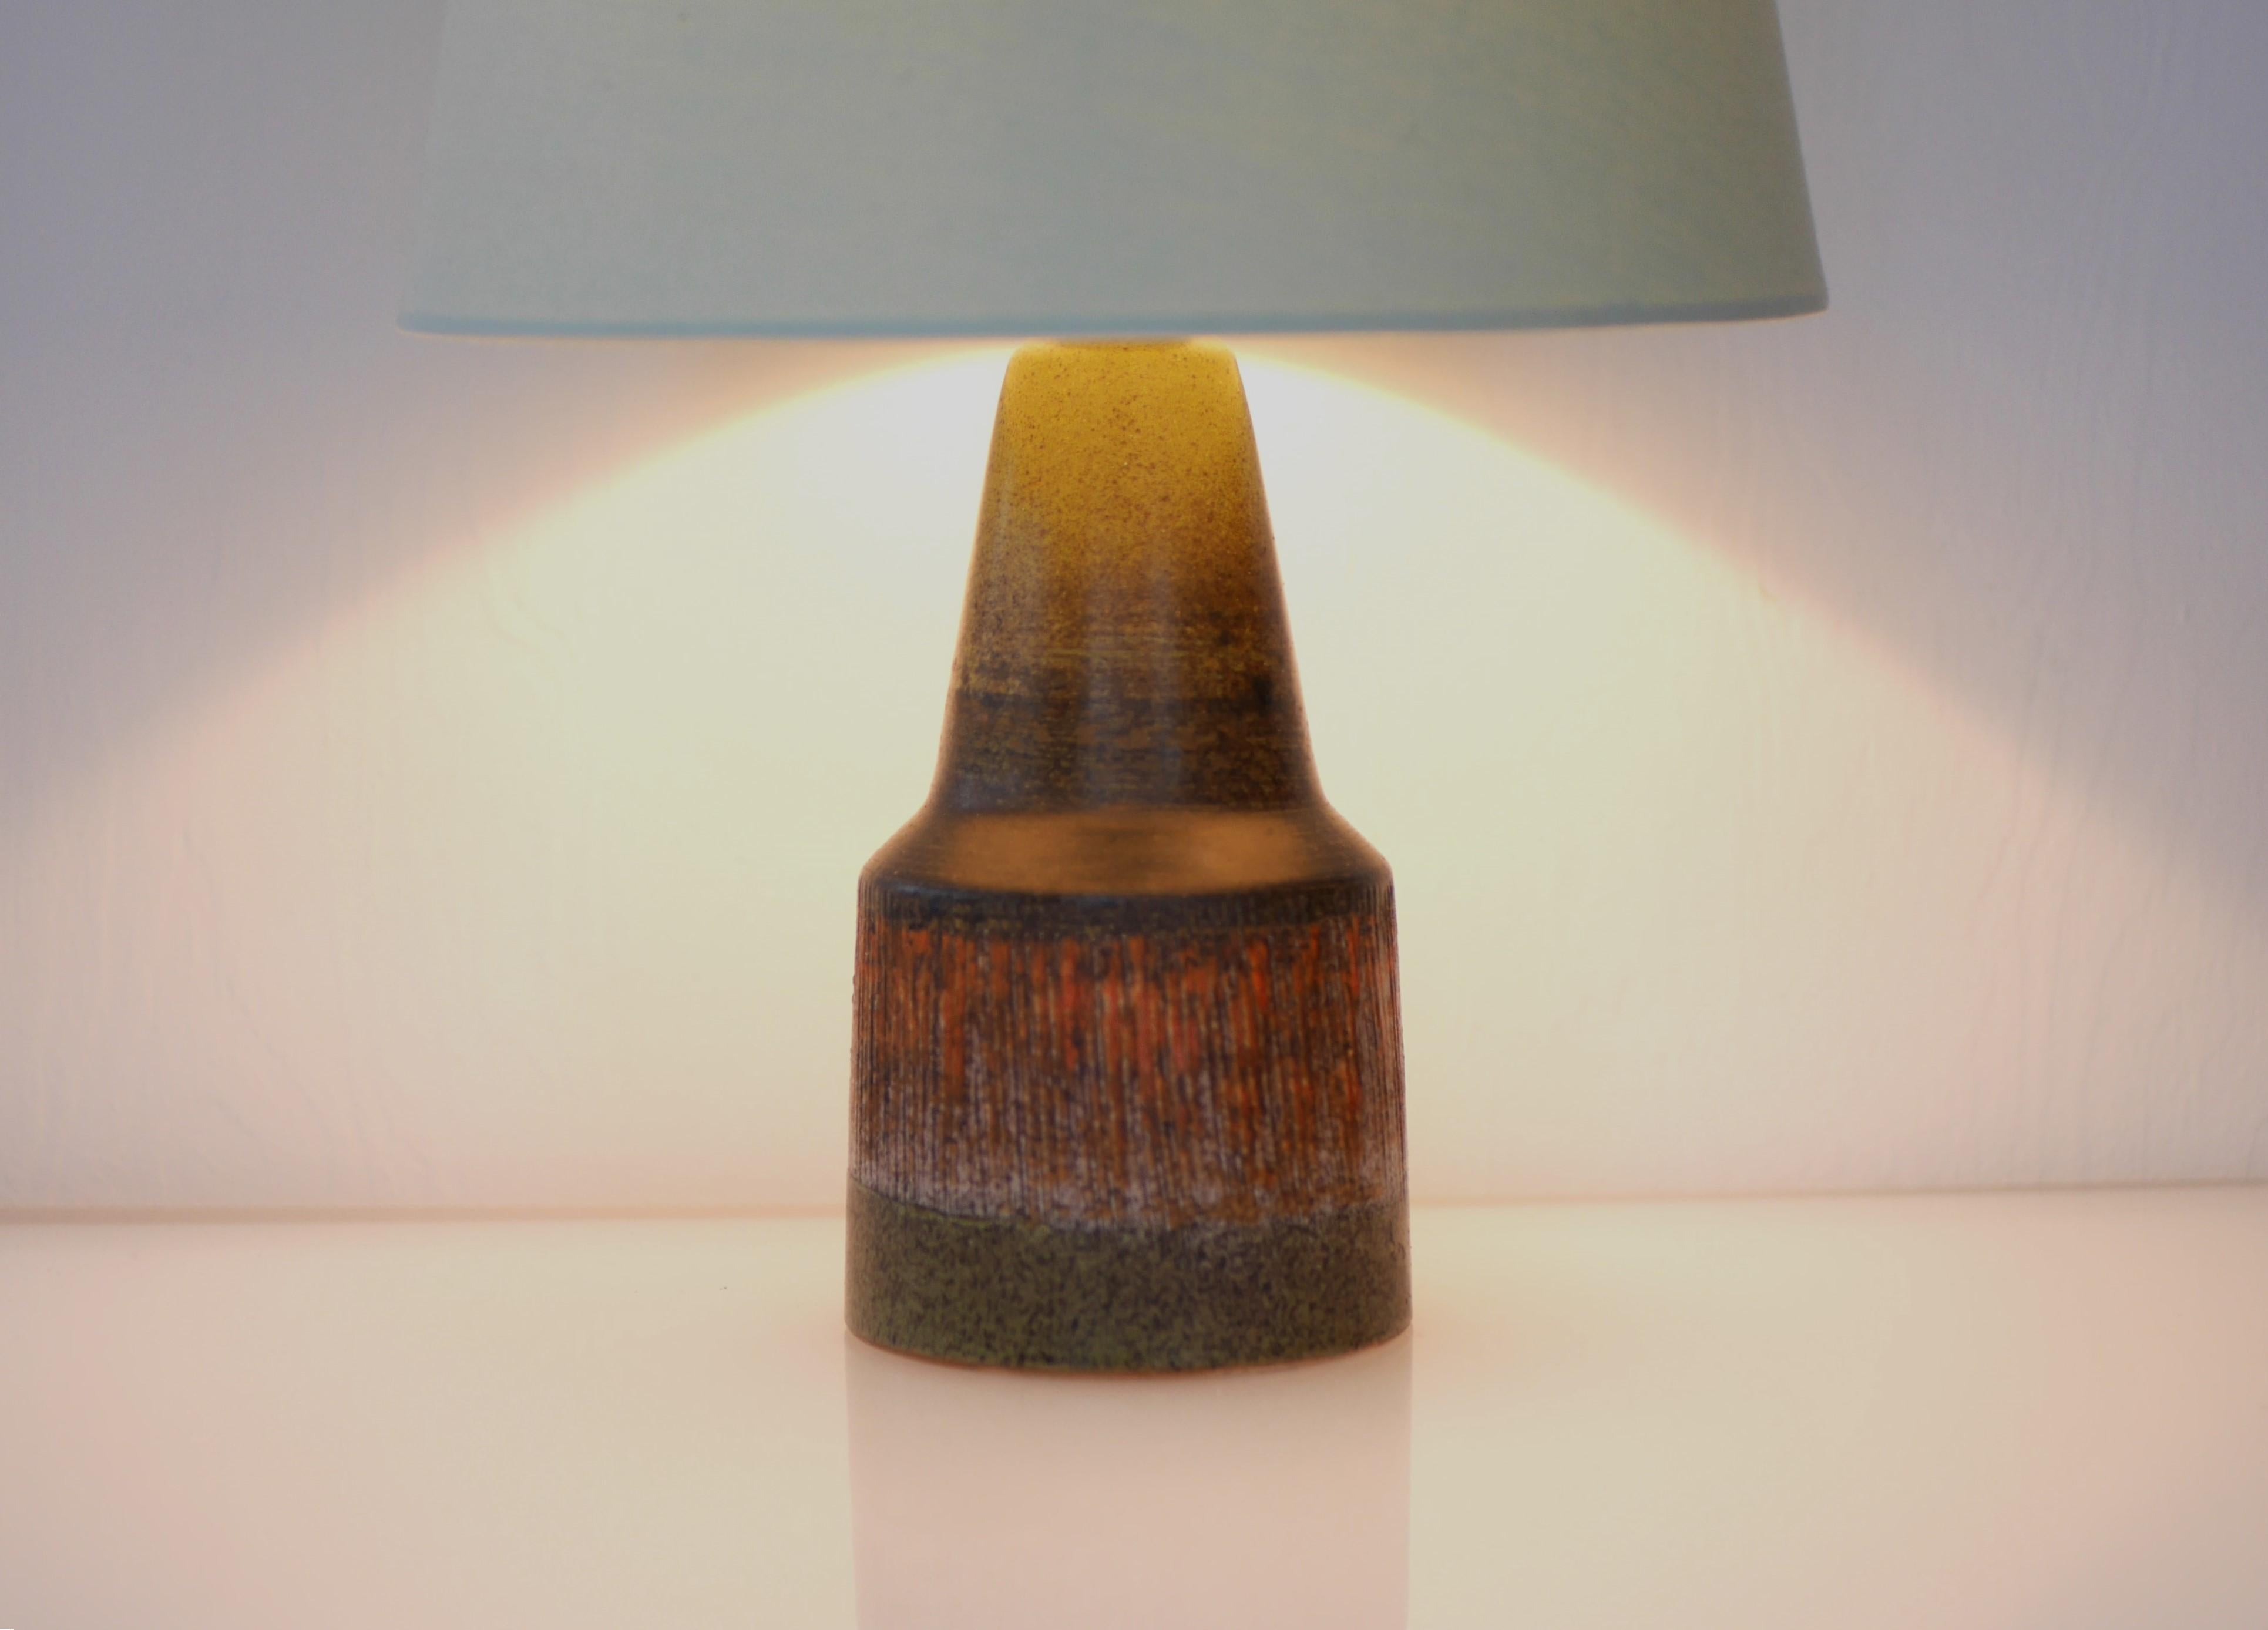 A very special ceramic lamp base from Tilgmans, Sweden. This lamp is very typical of his style when it comes to patterns and glazing from the 1970s. The design is simple and honest, yet it is glazing and the colors which makes it rather special. The